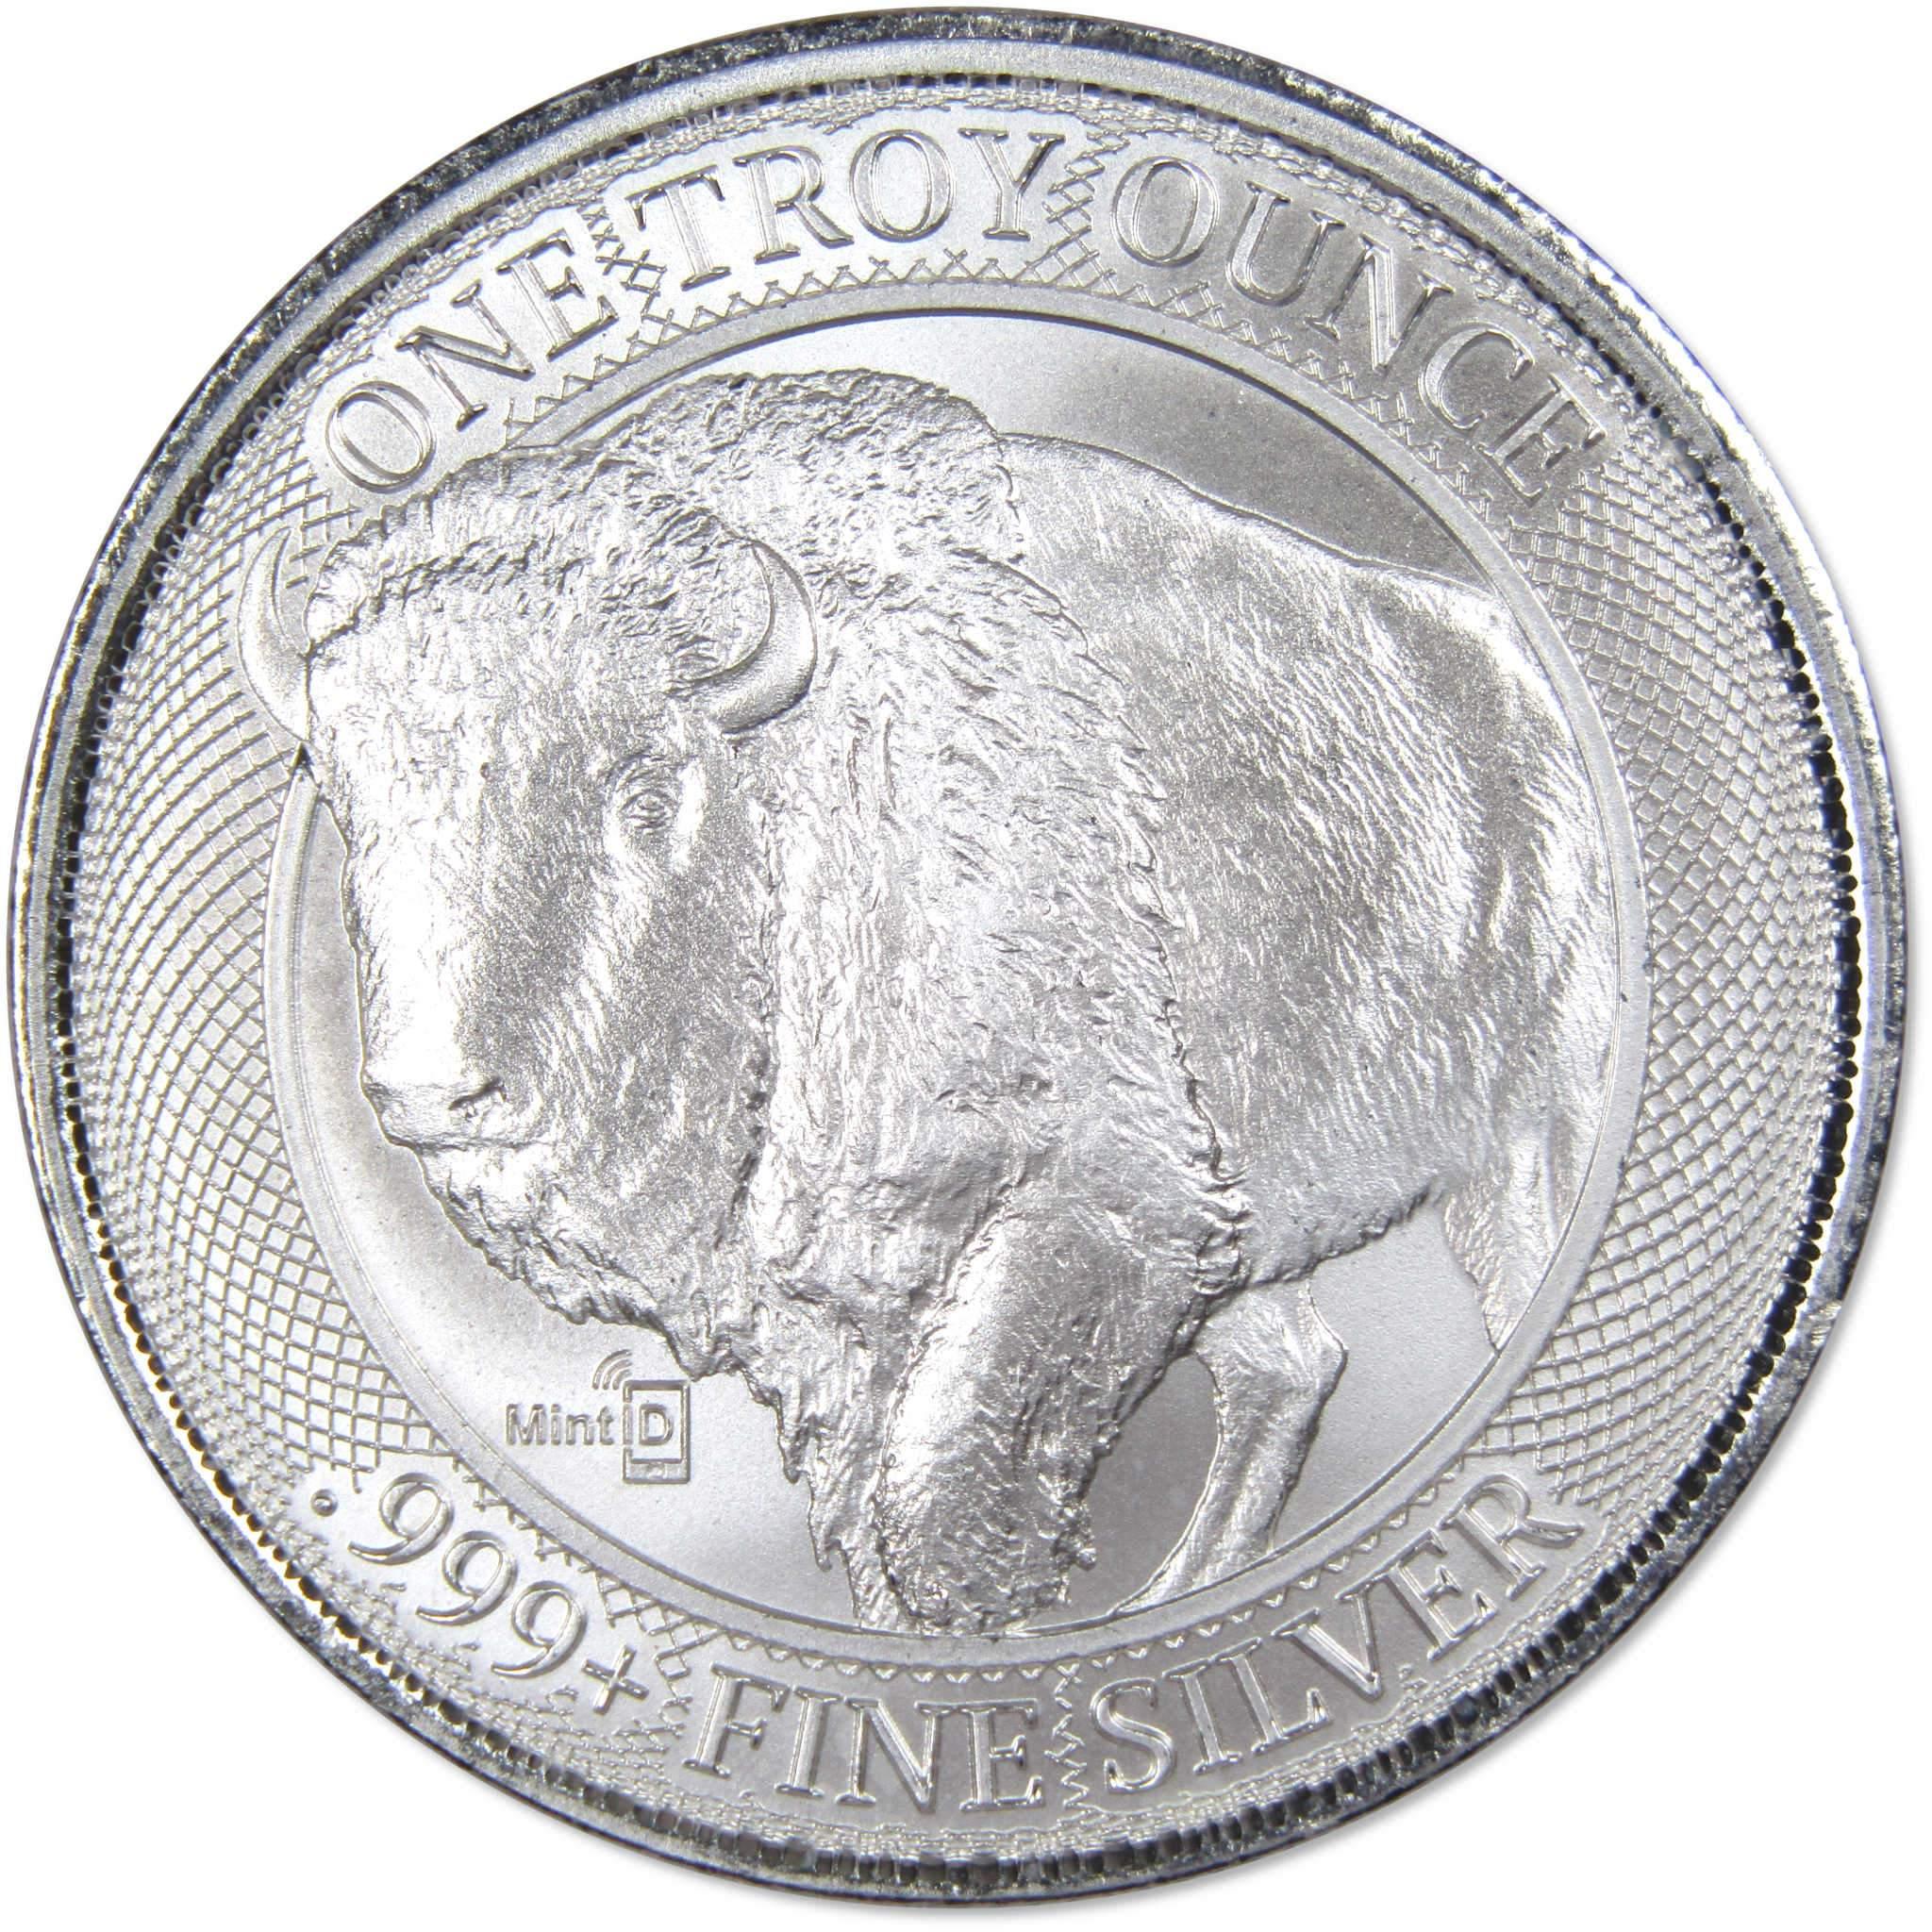 Buffalo 1 oz .999 Fine Silver Round MintID with NFC Scan Authentication